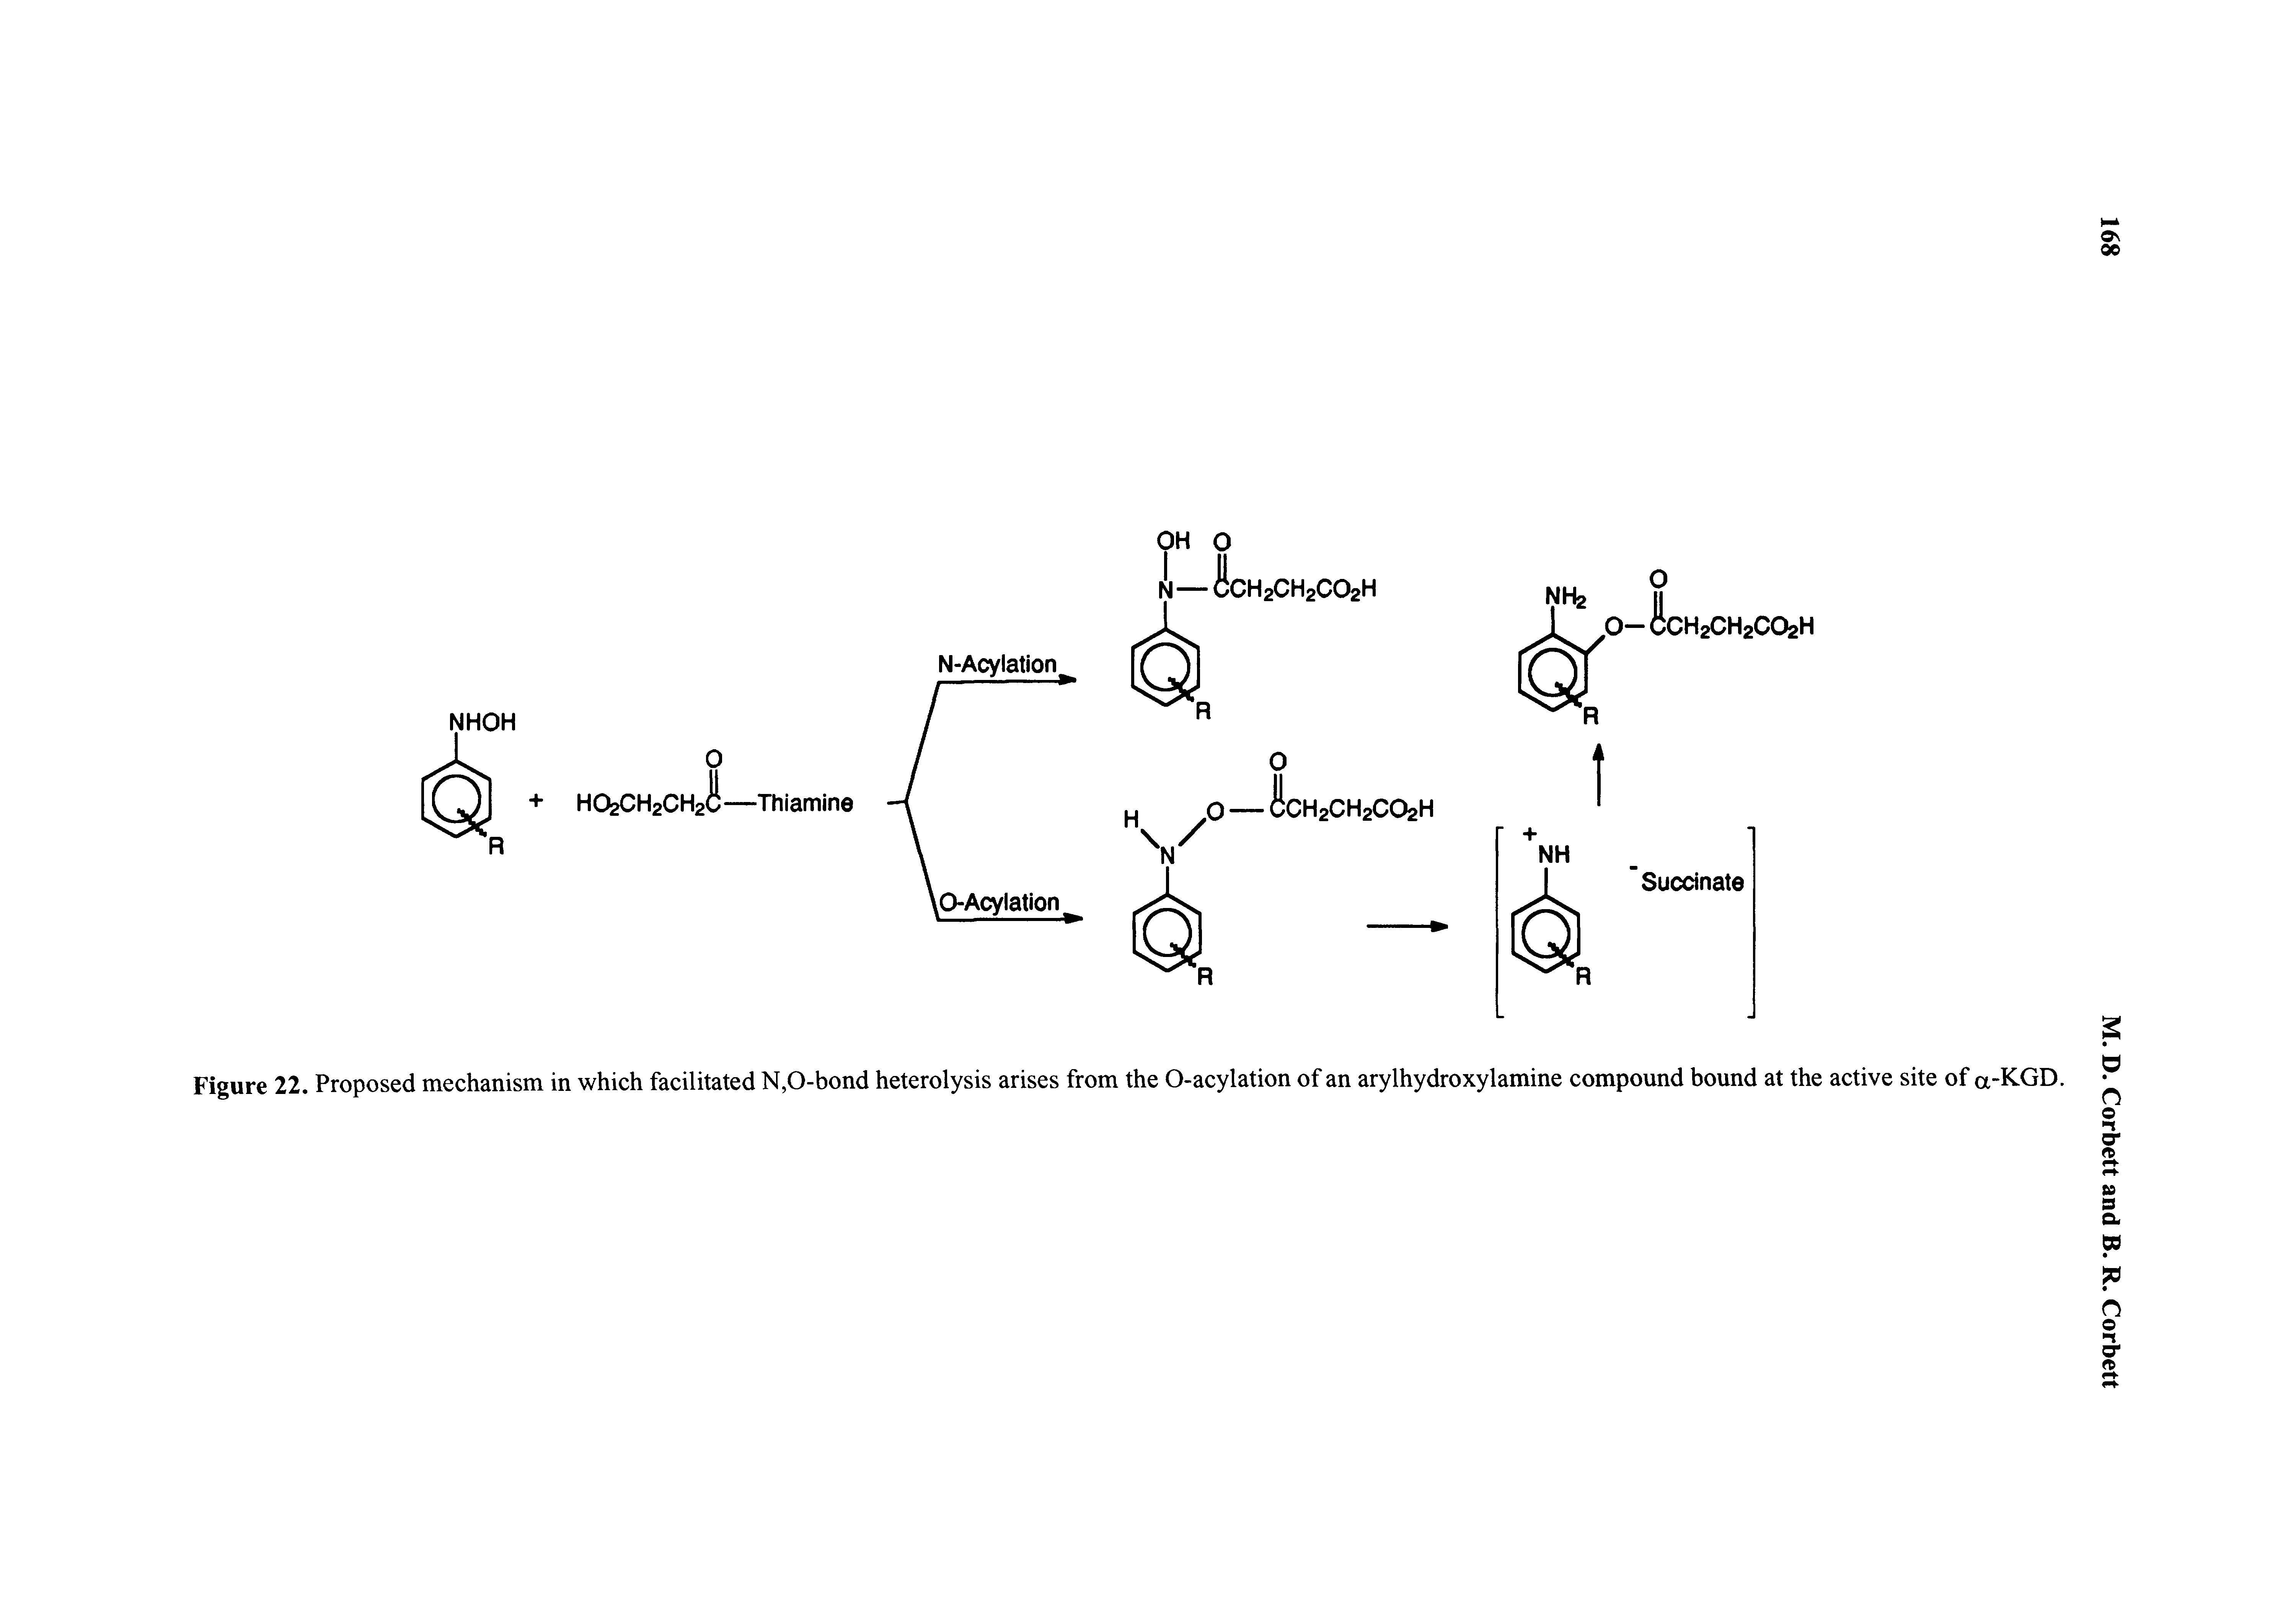 Figure 22. Proposed mechanism in which facilitated N,0-bond heterolysis arises from the O-acylation of an arylhydroxylamine compound bound at the active site of a-KGD.